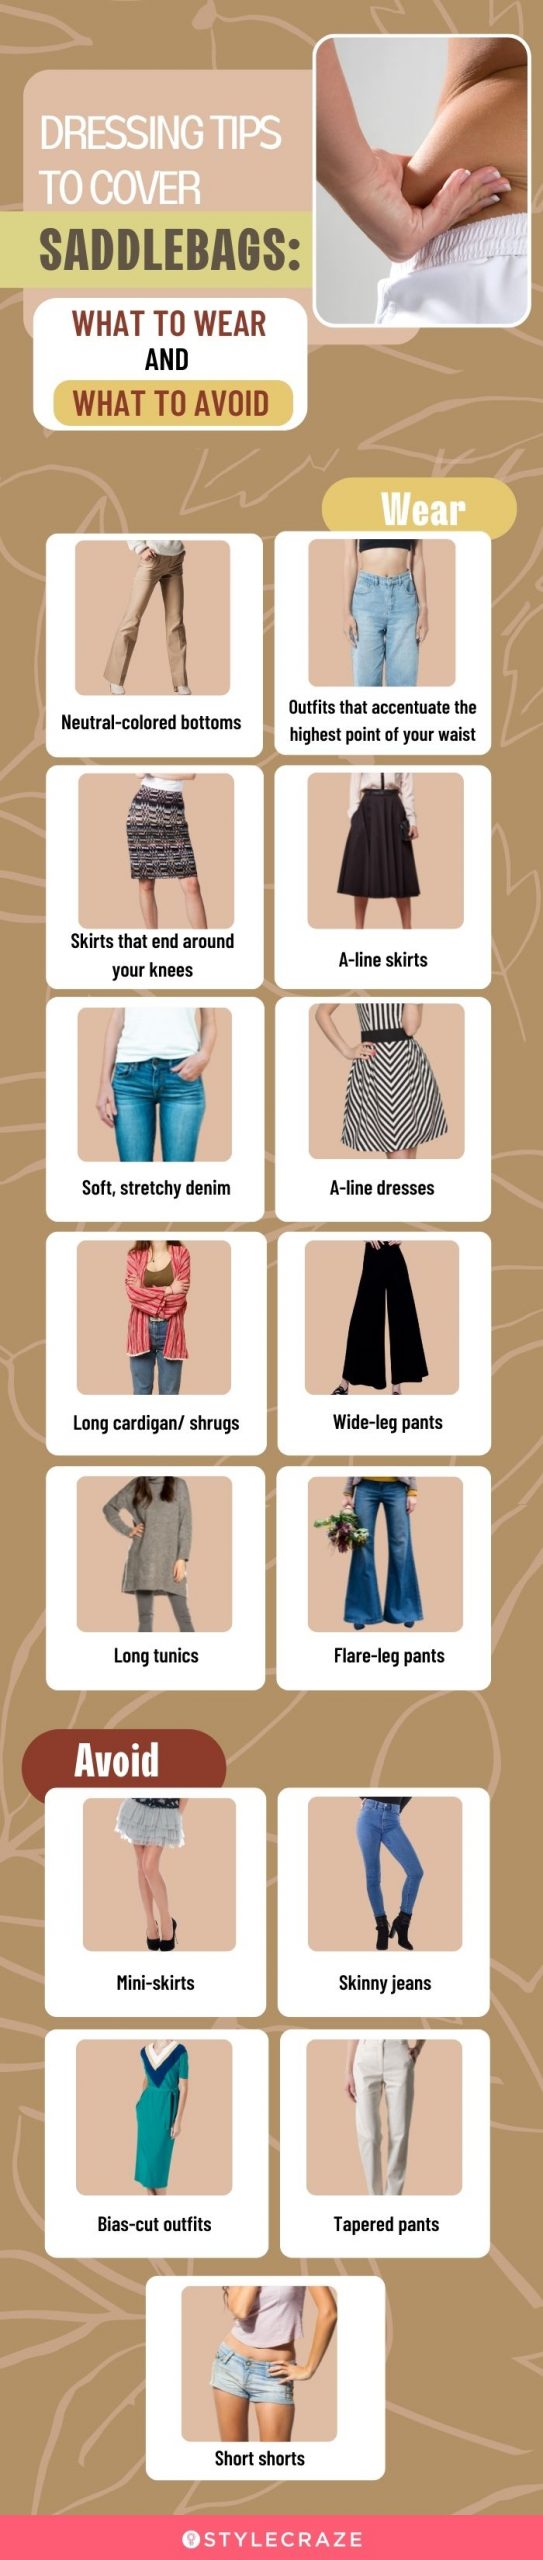 dressing tips to cover saddlebags what to wear and what to avoid (infographic)